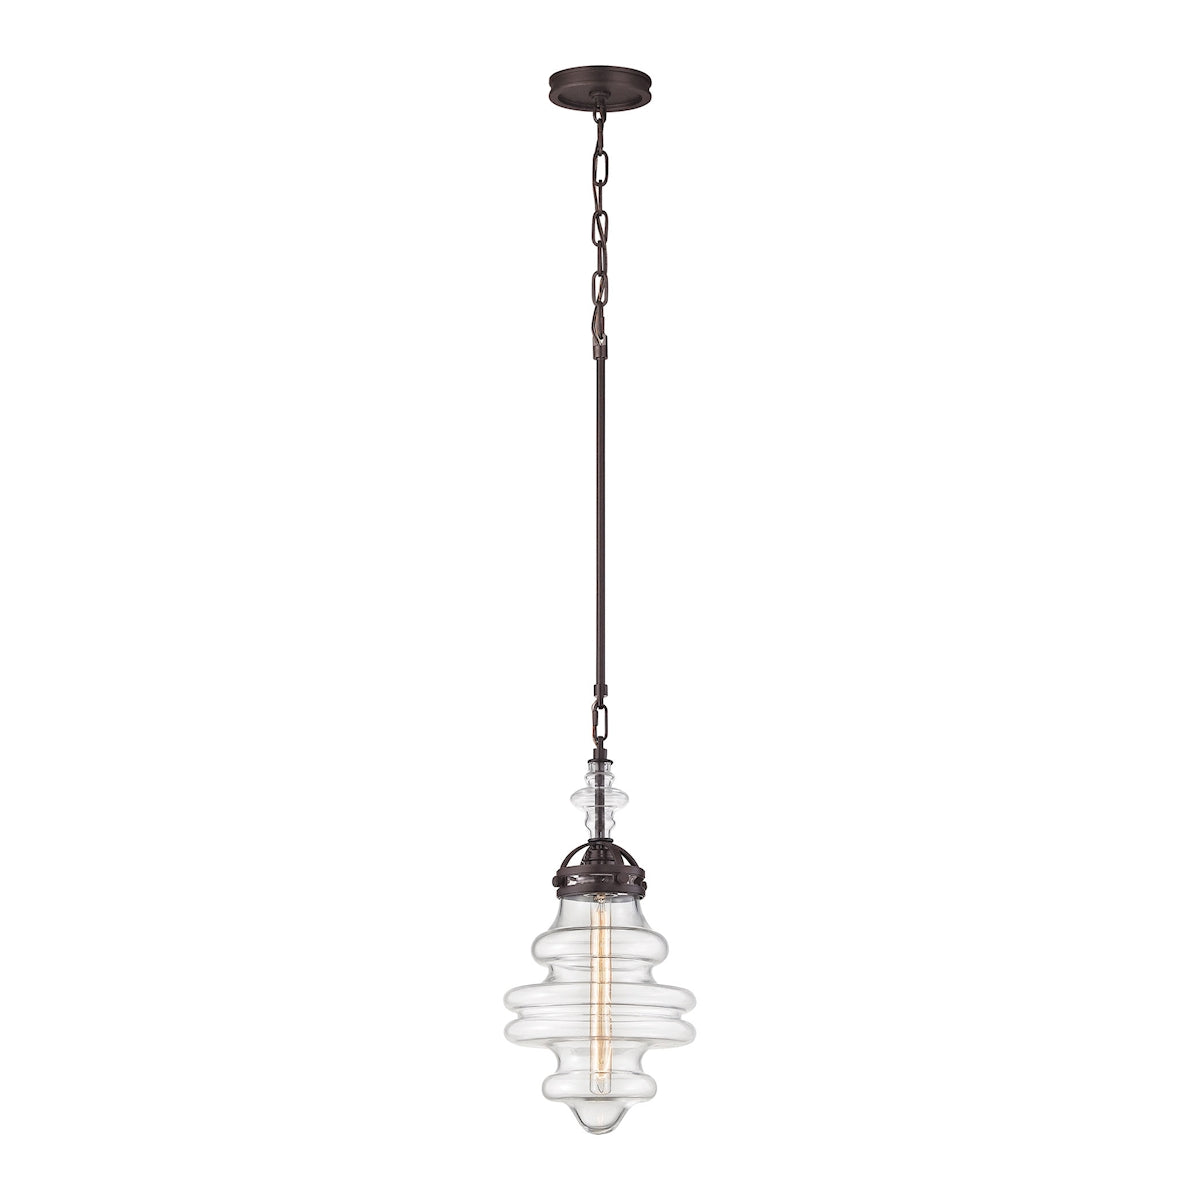 ELK Lighting 66127/1 Gramercy 1-Light Mini Pendant in Oil Rubbed Bronze with Clear Glass